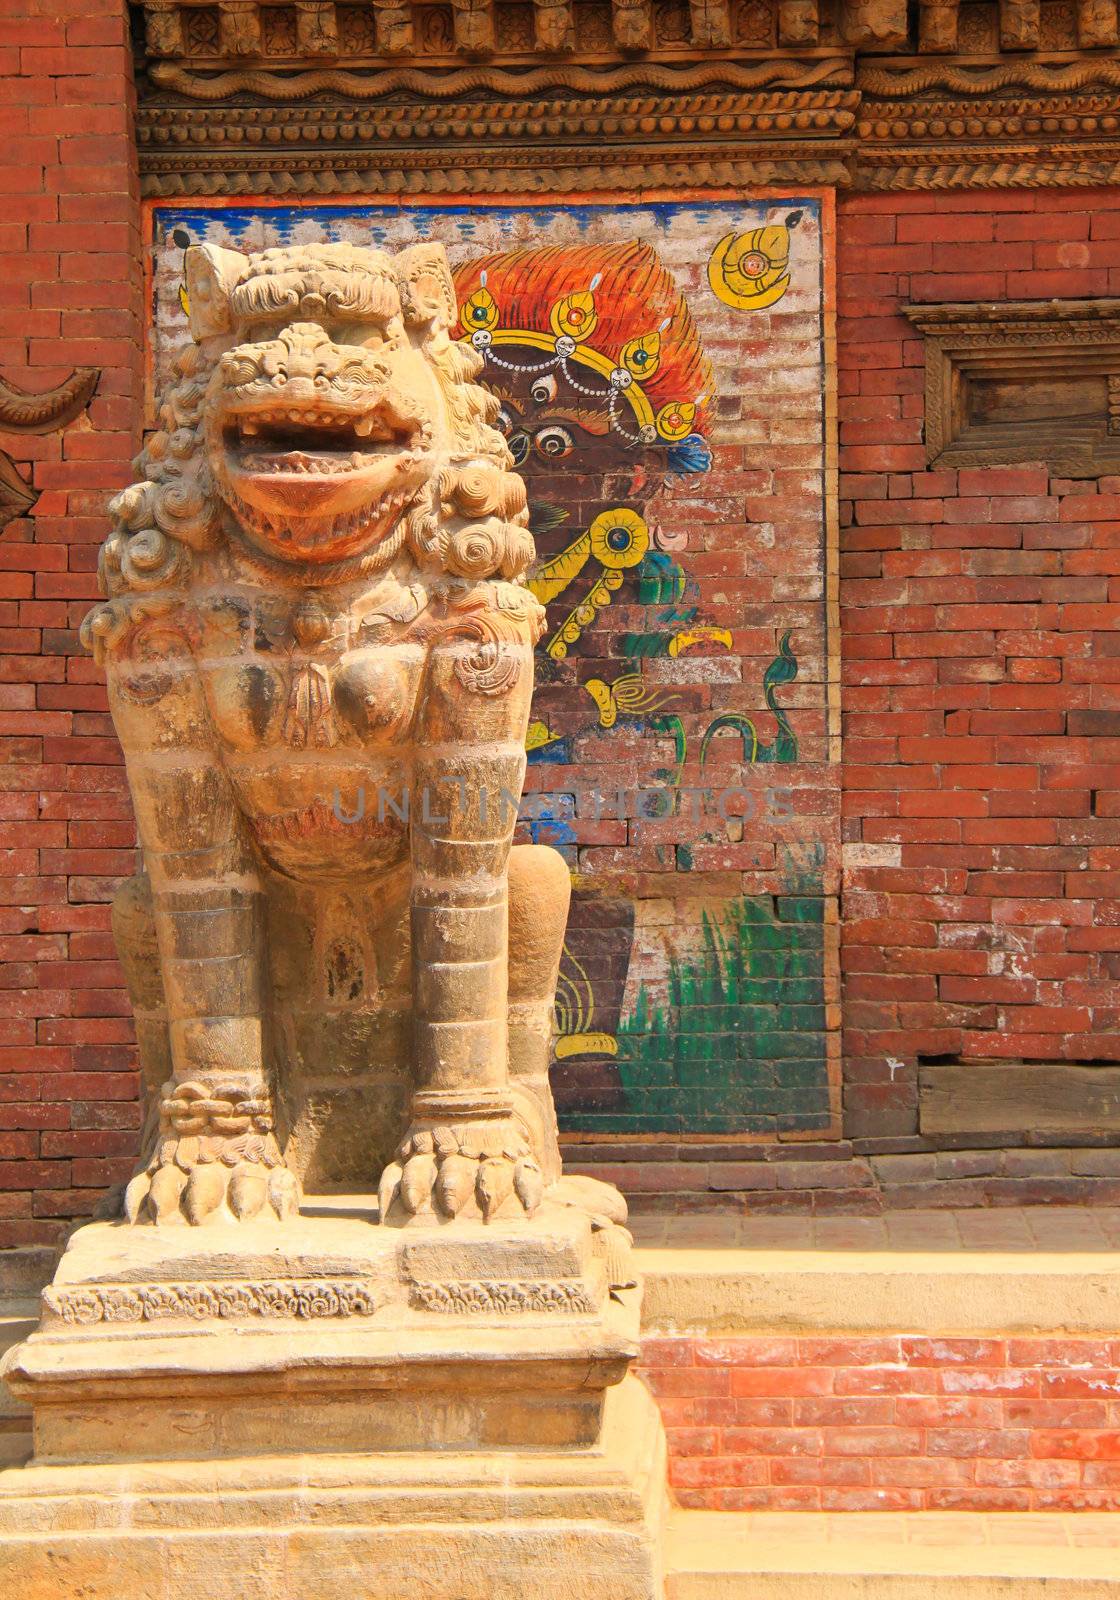 Lion statues in the ancient city, Nepal